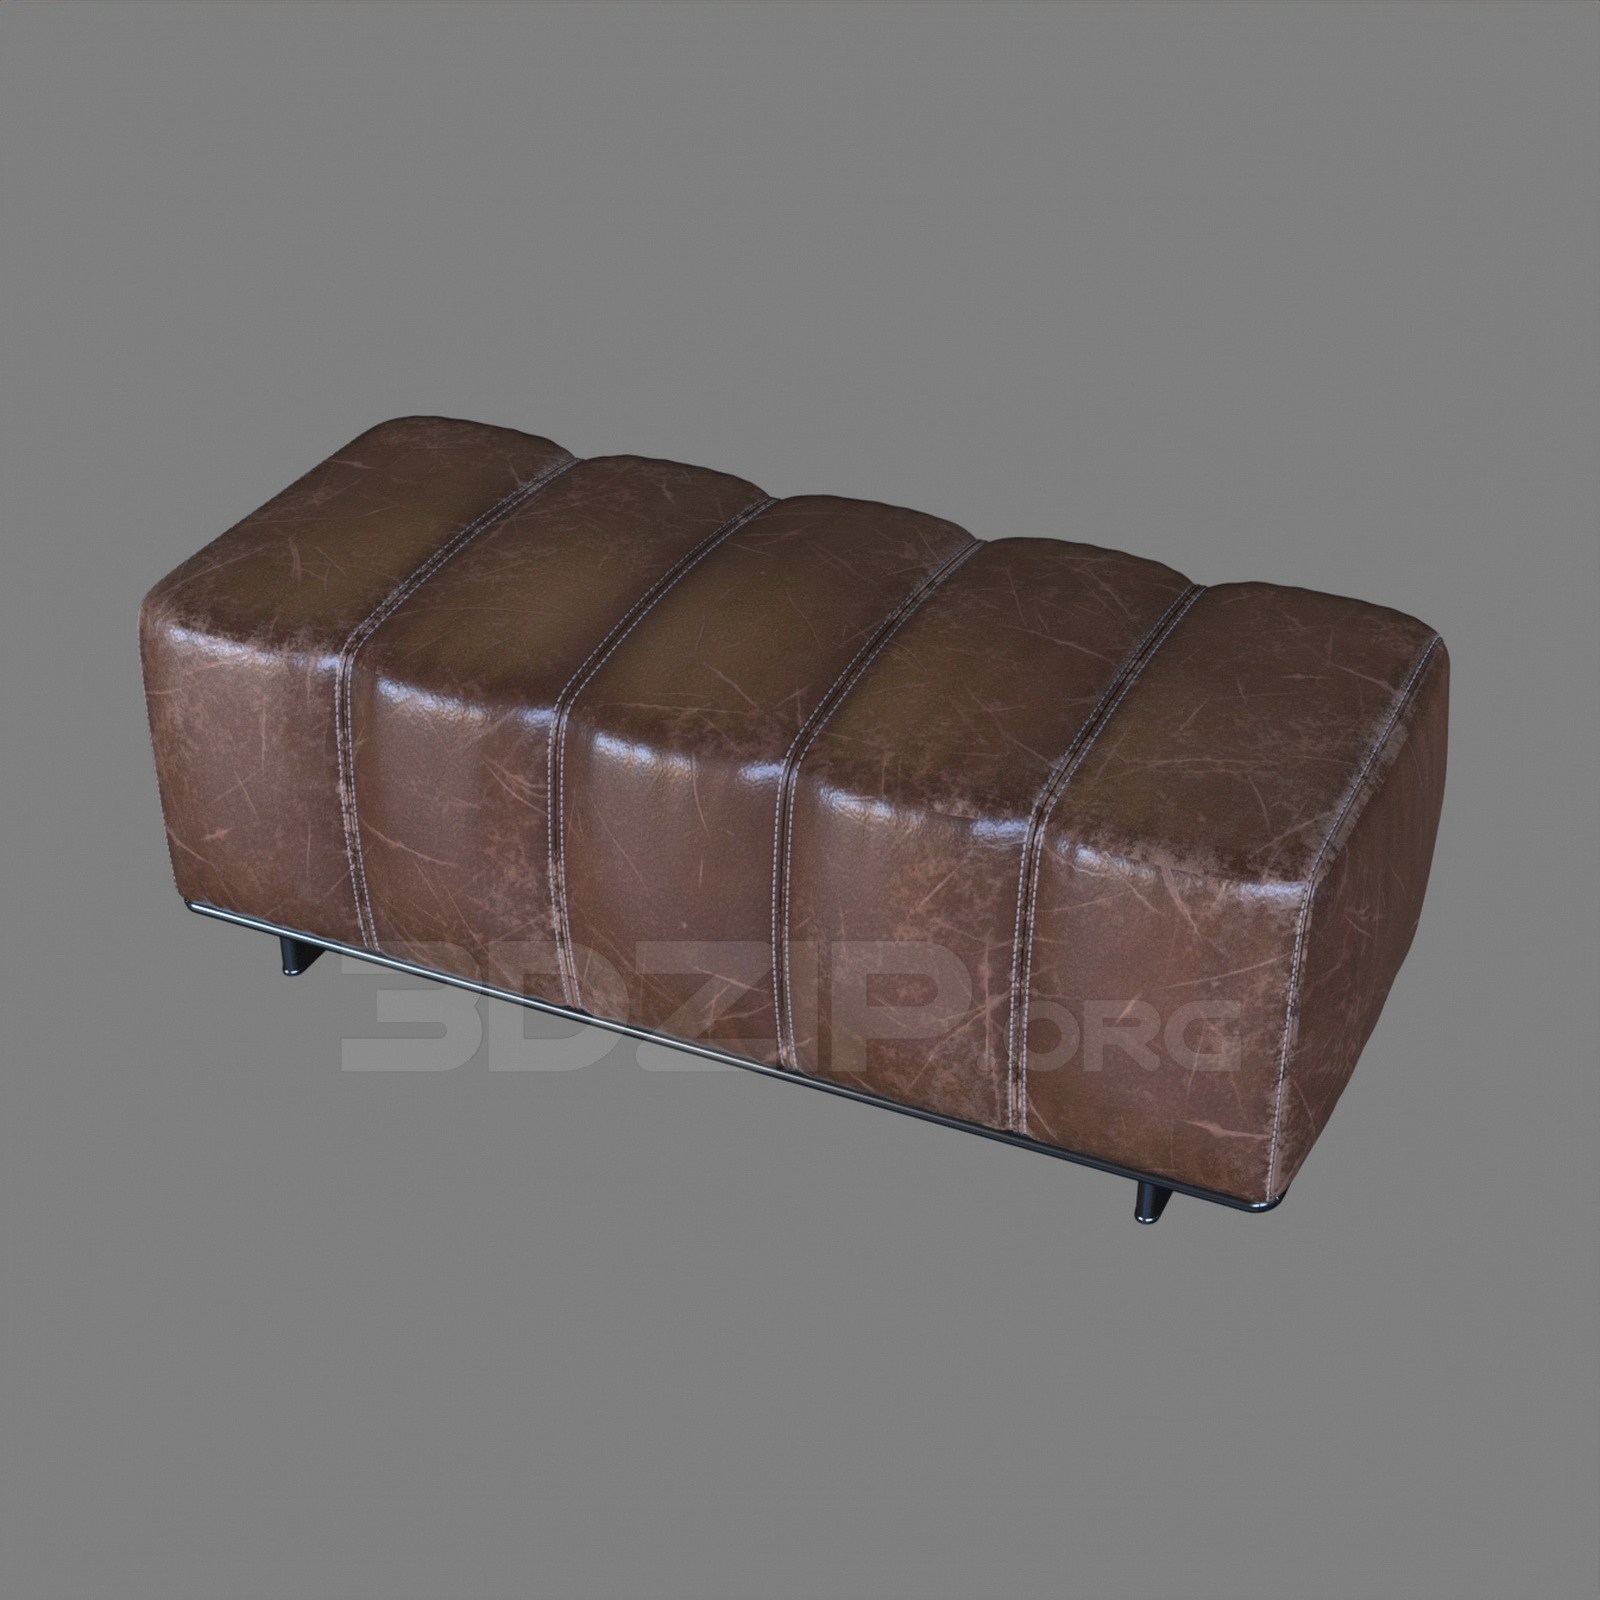 12345. Download Free Armchair Model By Anh Viet Tran